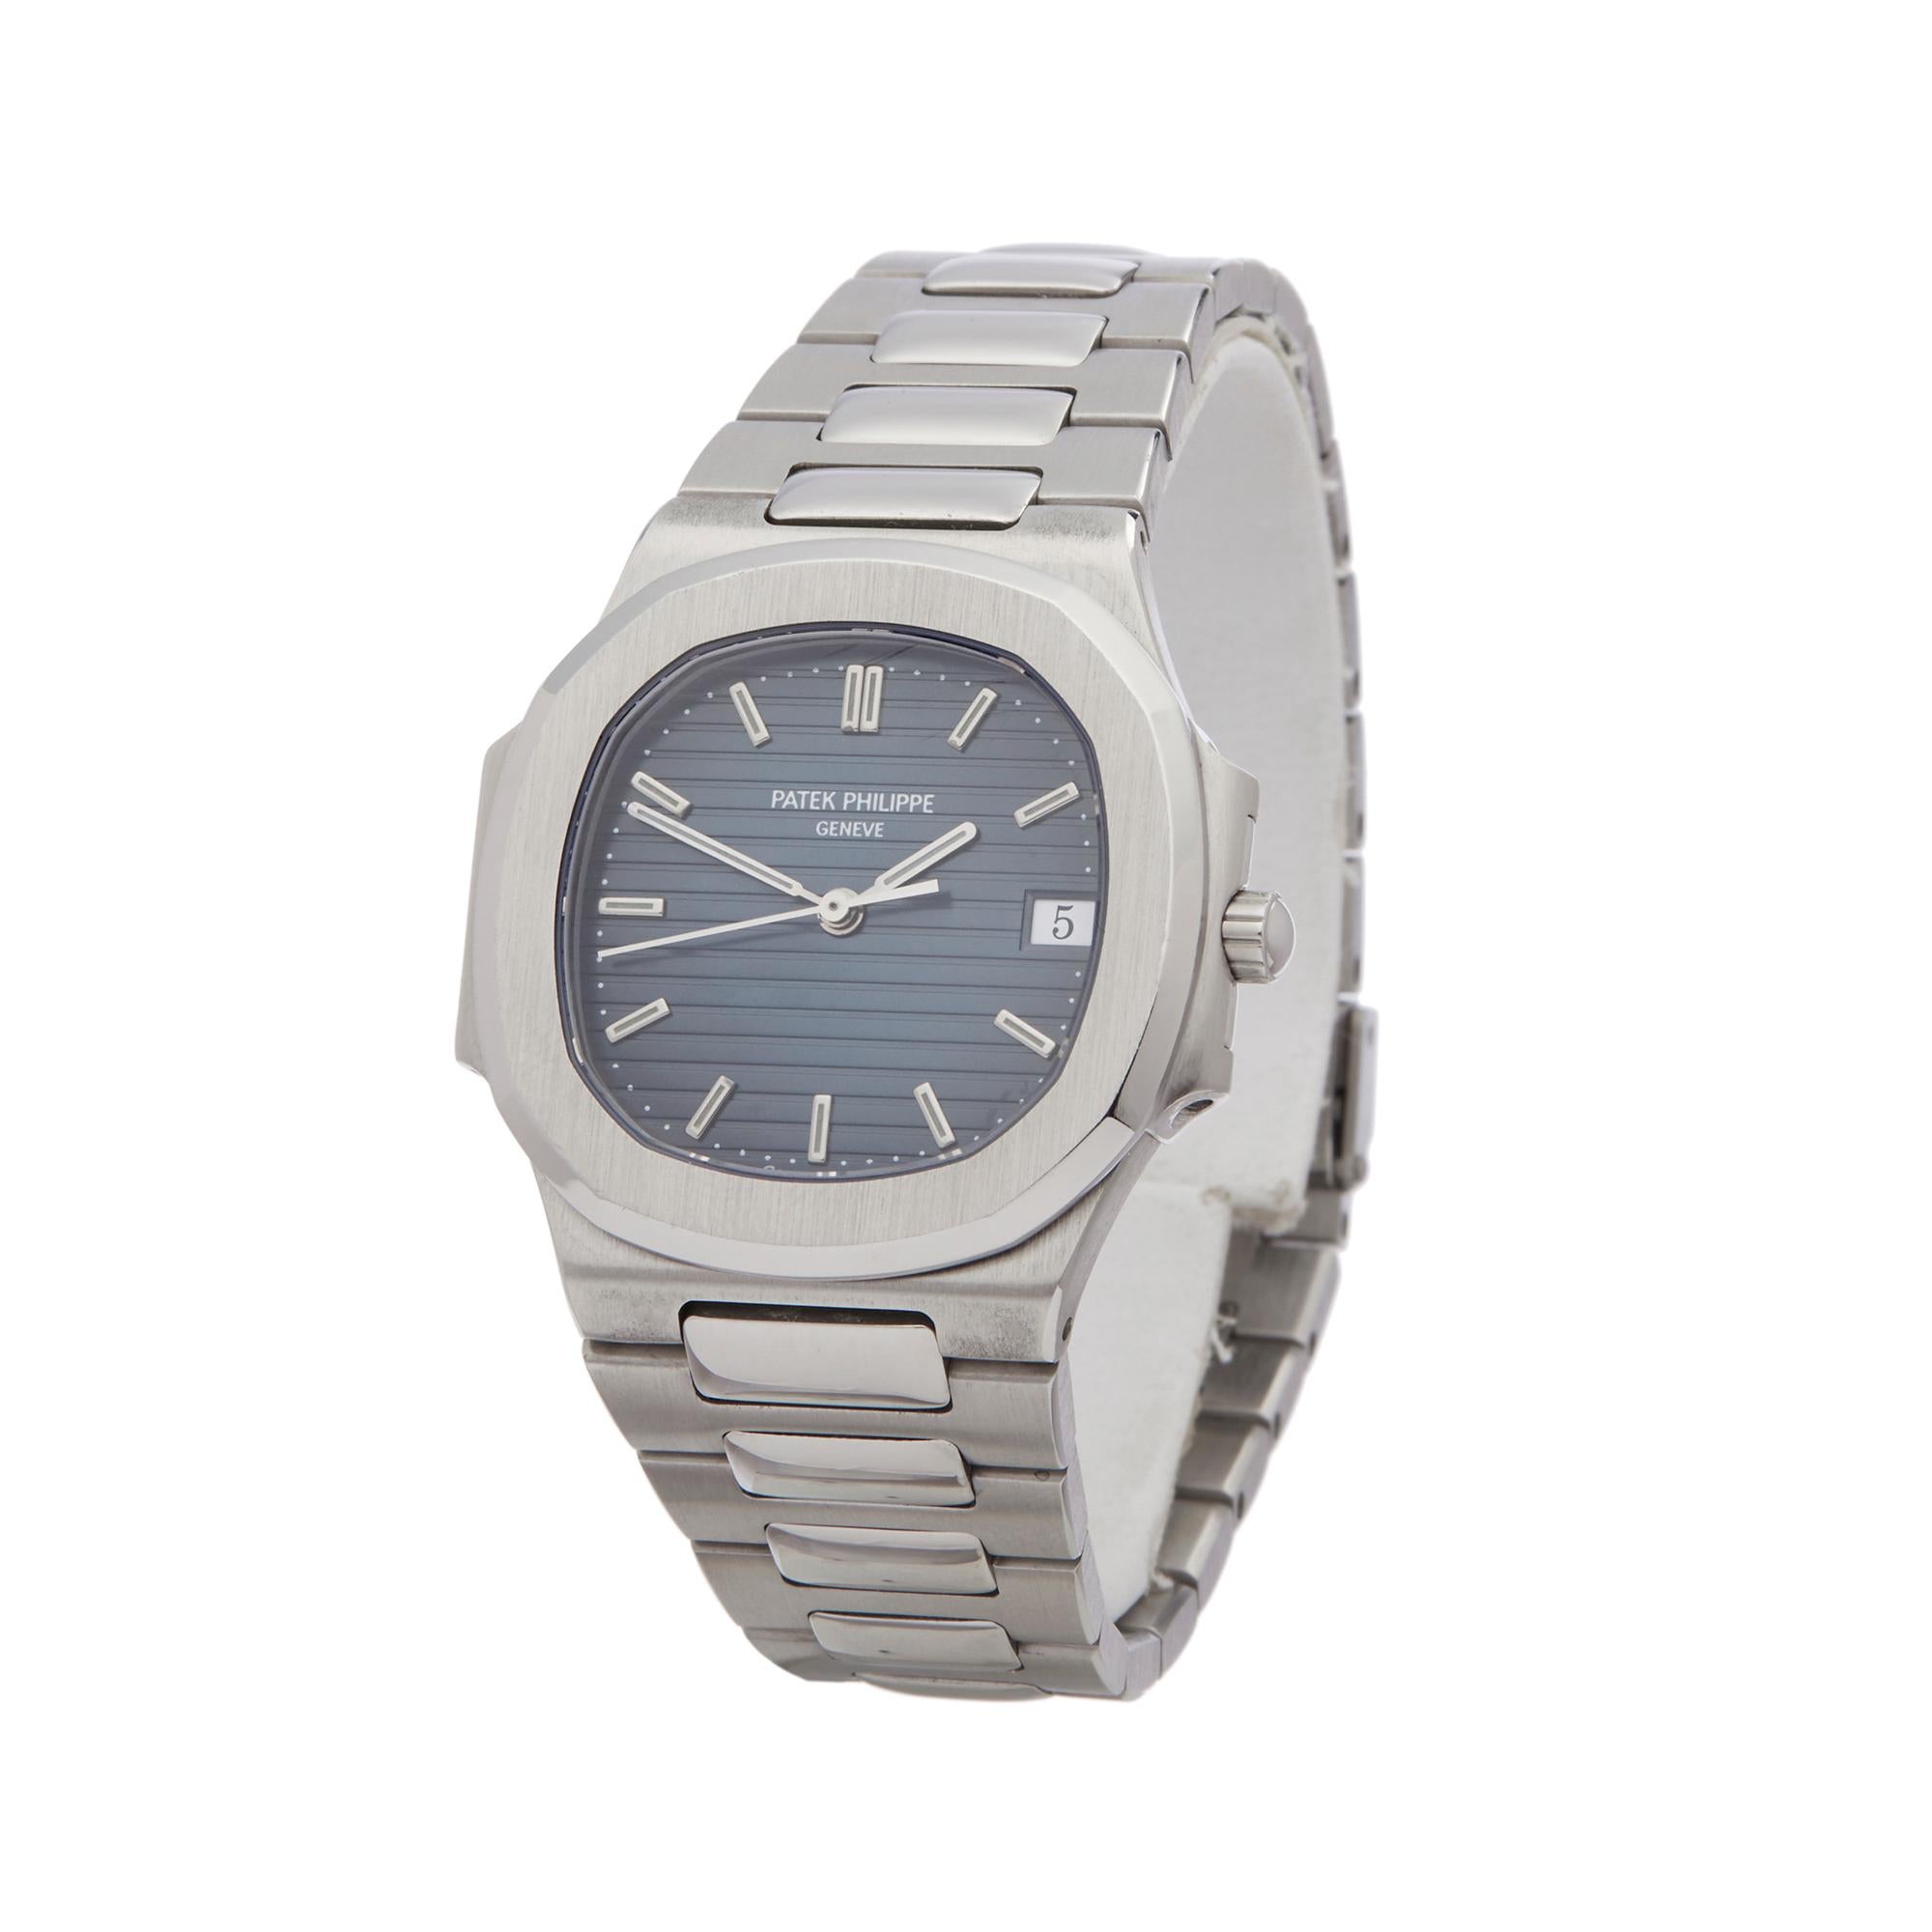 Ref: W6308
Manufacturer: Patek Philippe
Model: Nautilus 
Model Ref: 3900
Age: Circa 1990's
Gender: Ladies
Complete With: Xupes Presentation Pouch
Dial: Black Baton
Glass: Sapphire Crystal
Movement: Quartz
Water Resistance: To Manufacturers